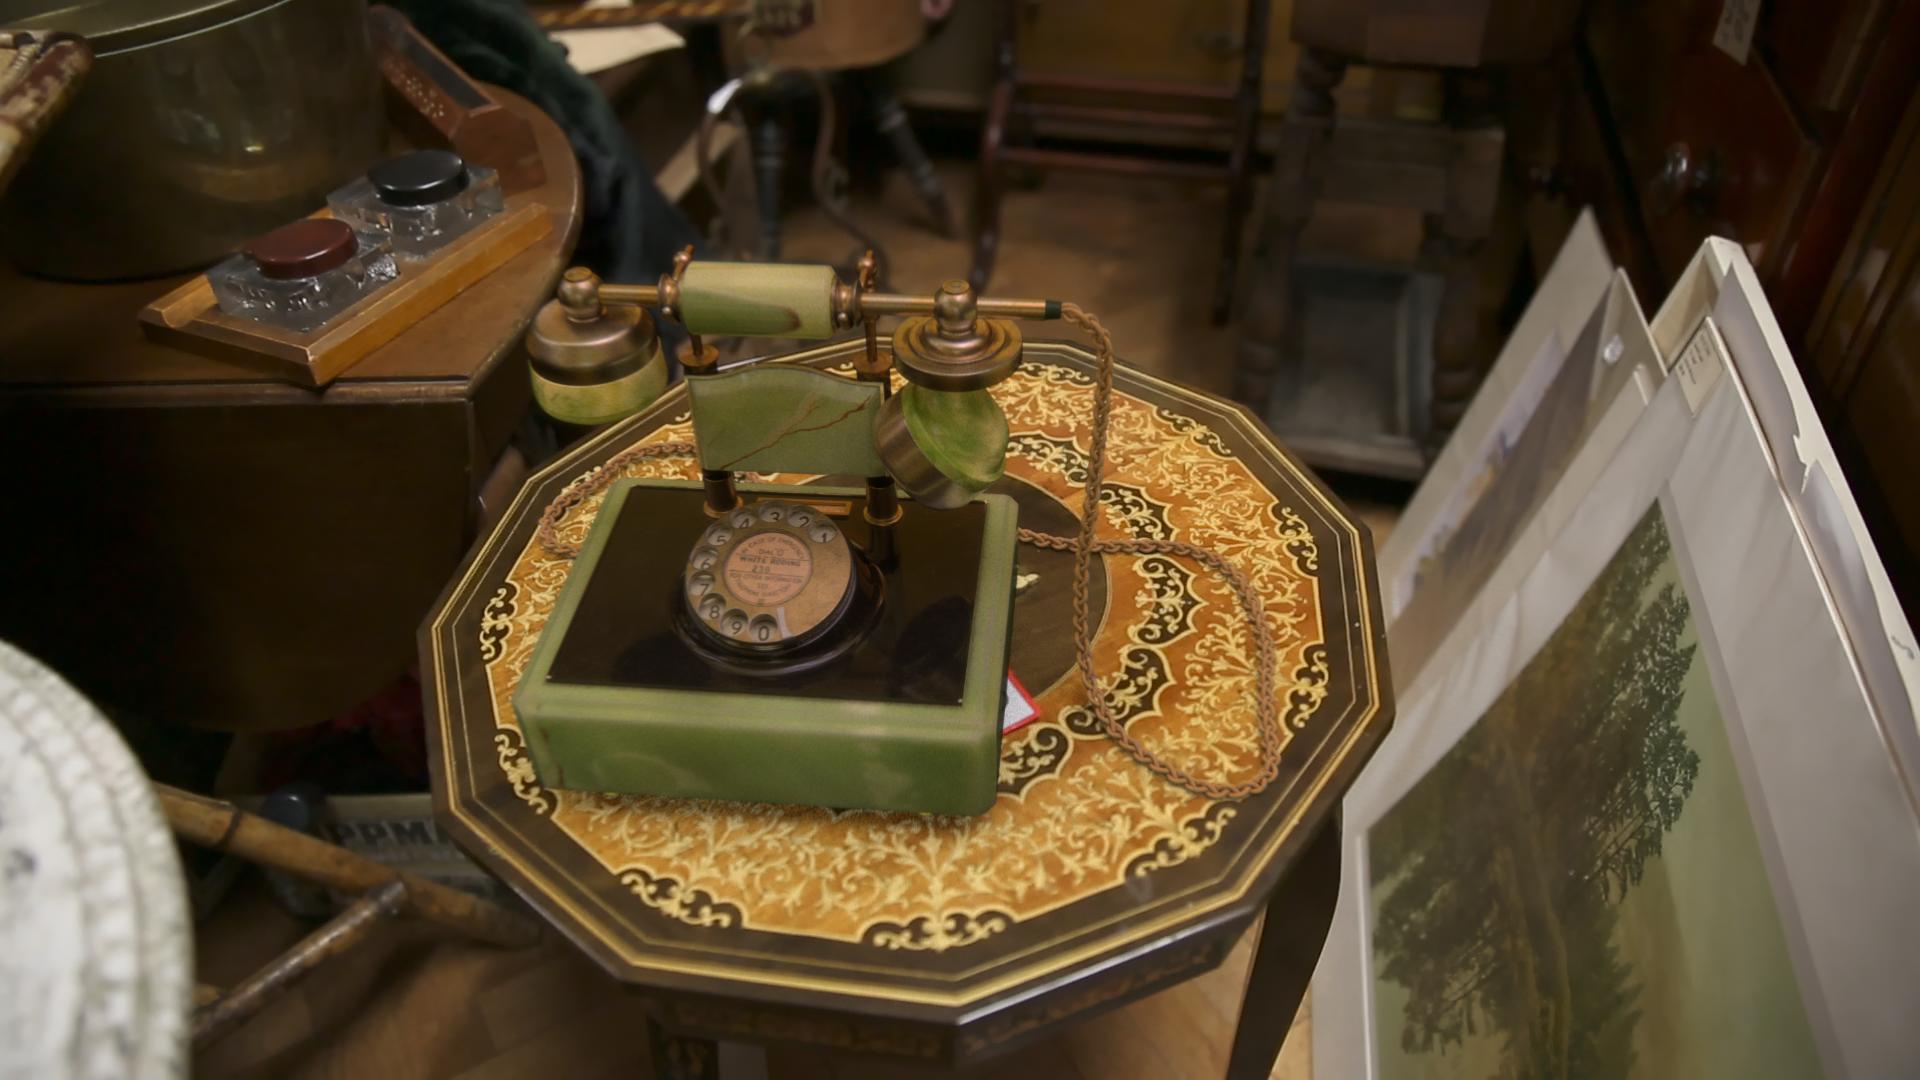 BA VFX work by Cameron Eddie showing the phone composited into an antique shop setting.